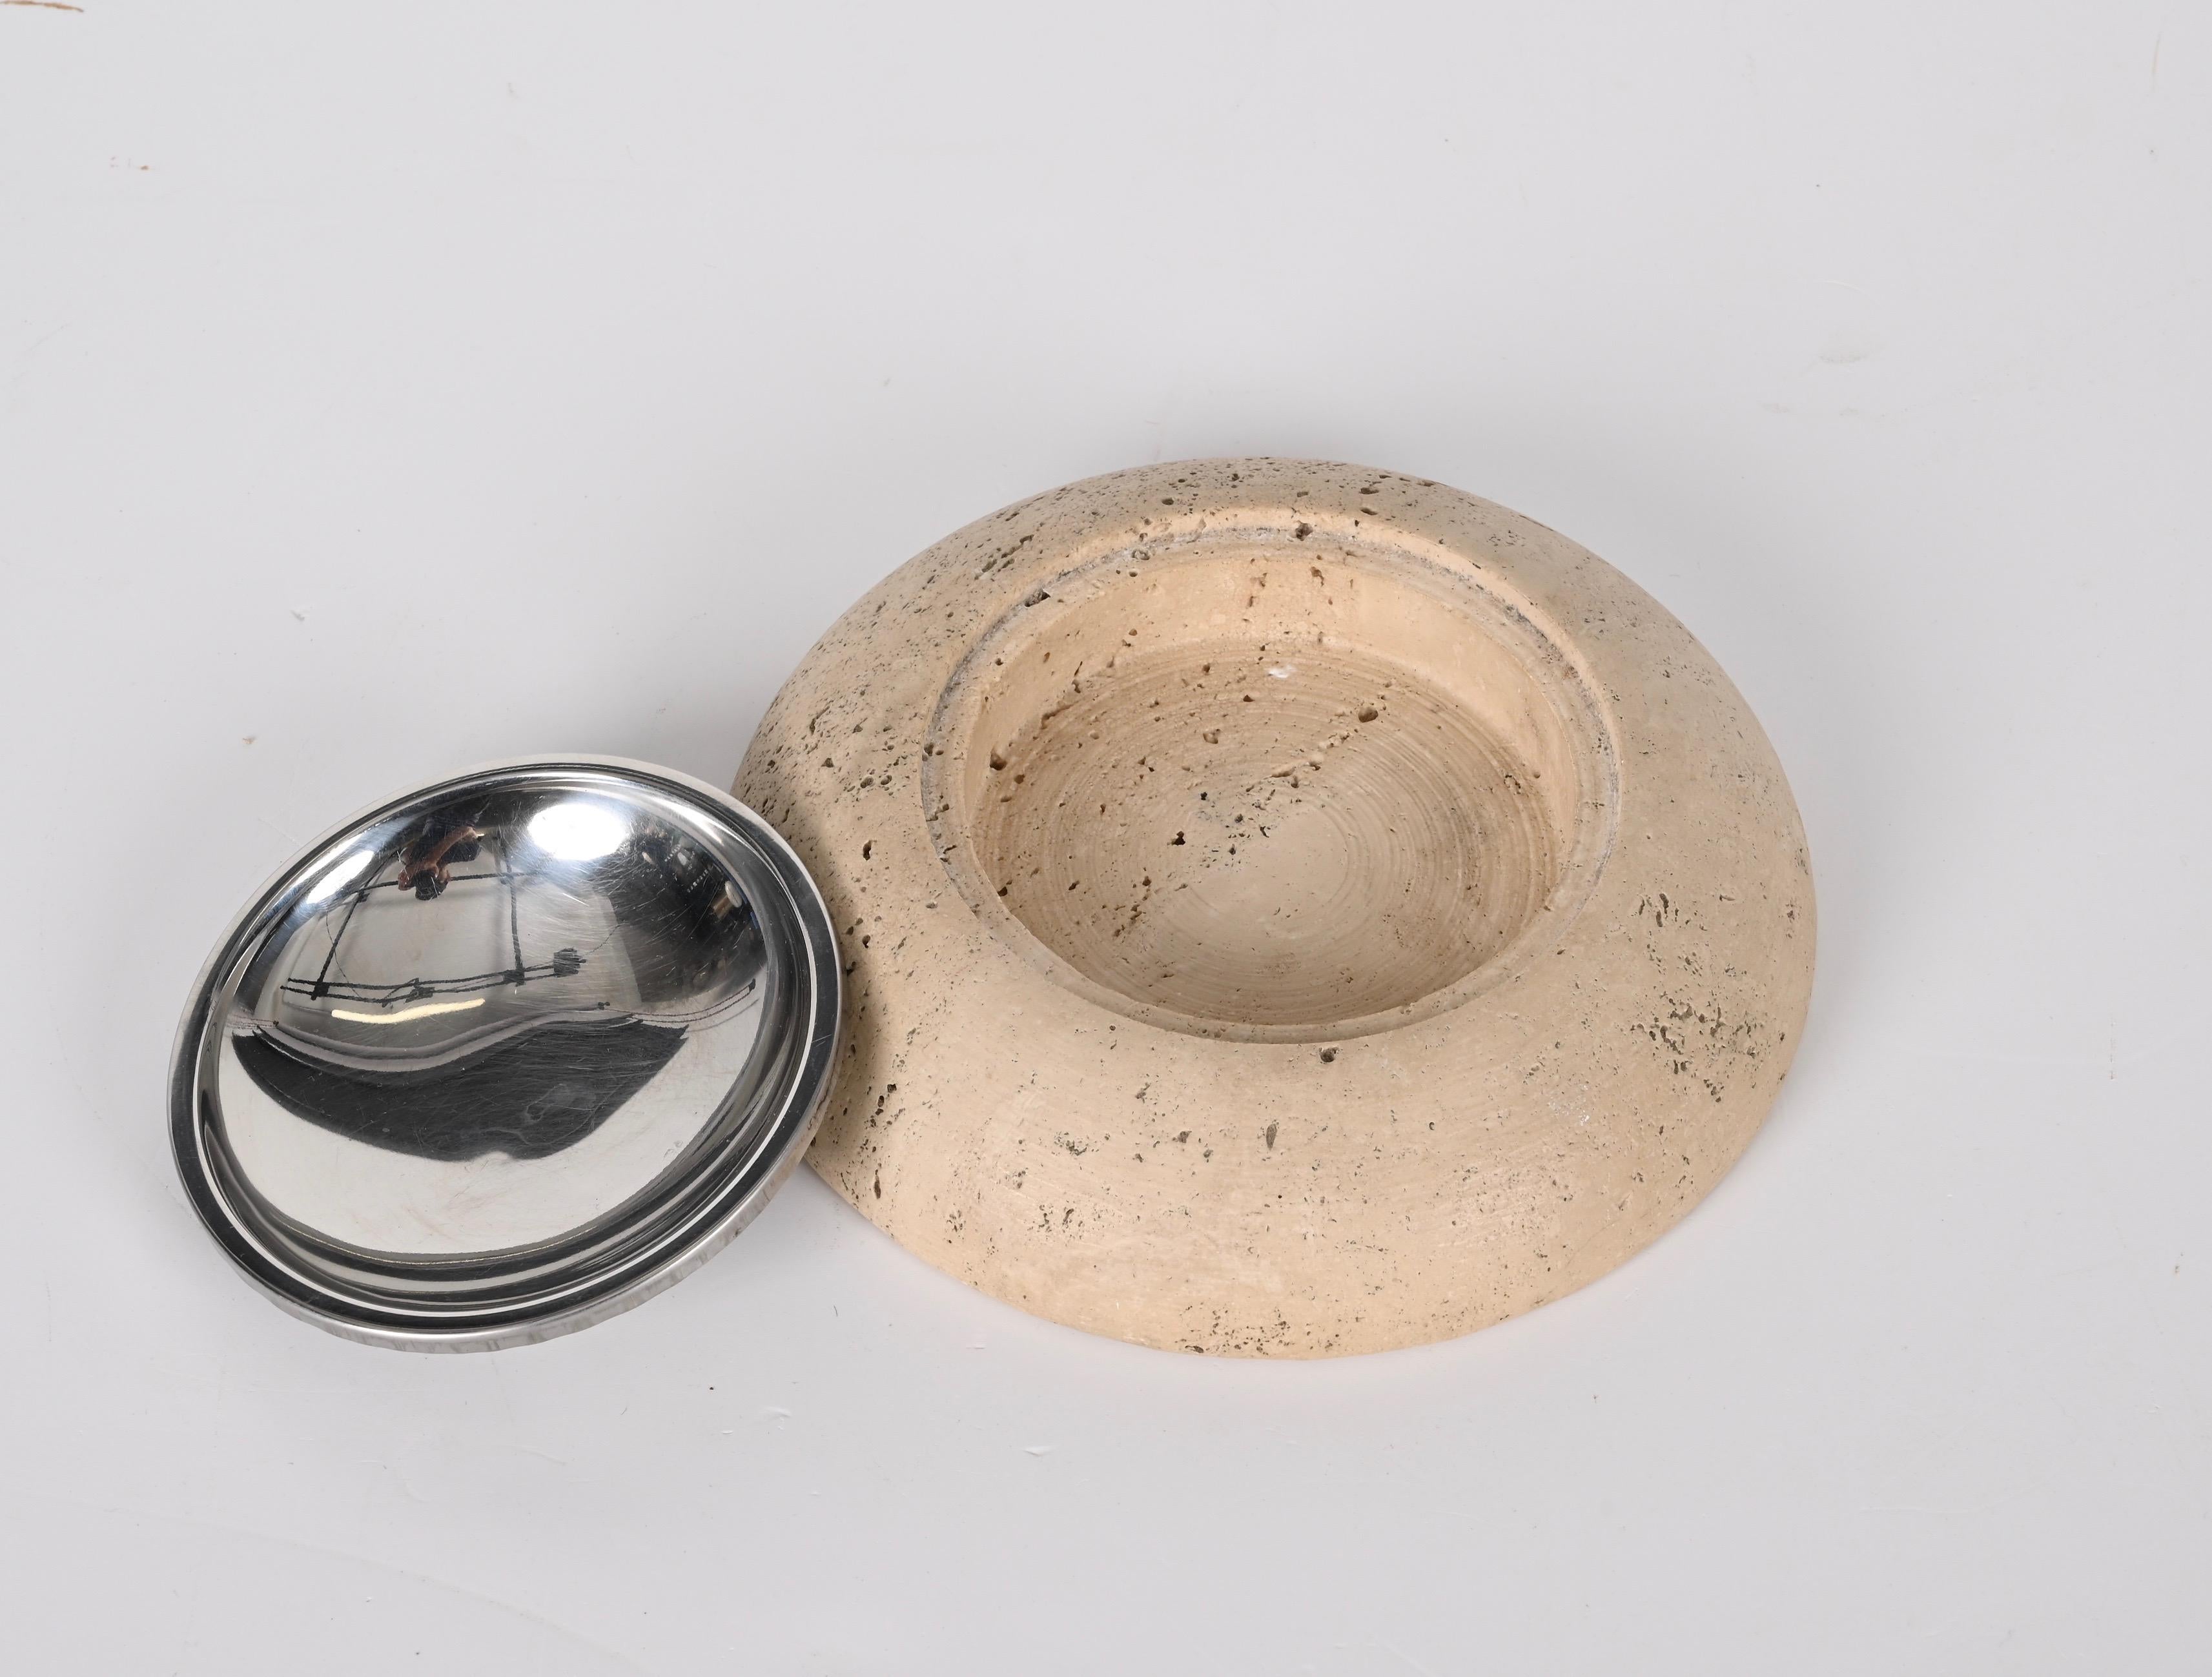 Midcentury Round Ashtray White Travertine Marble and Steel, Mannelli Italy 1970s For Sale 6